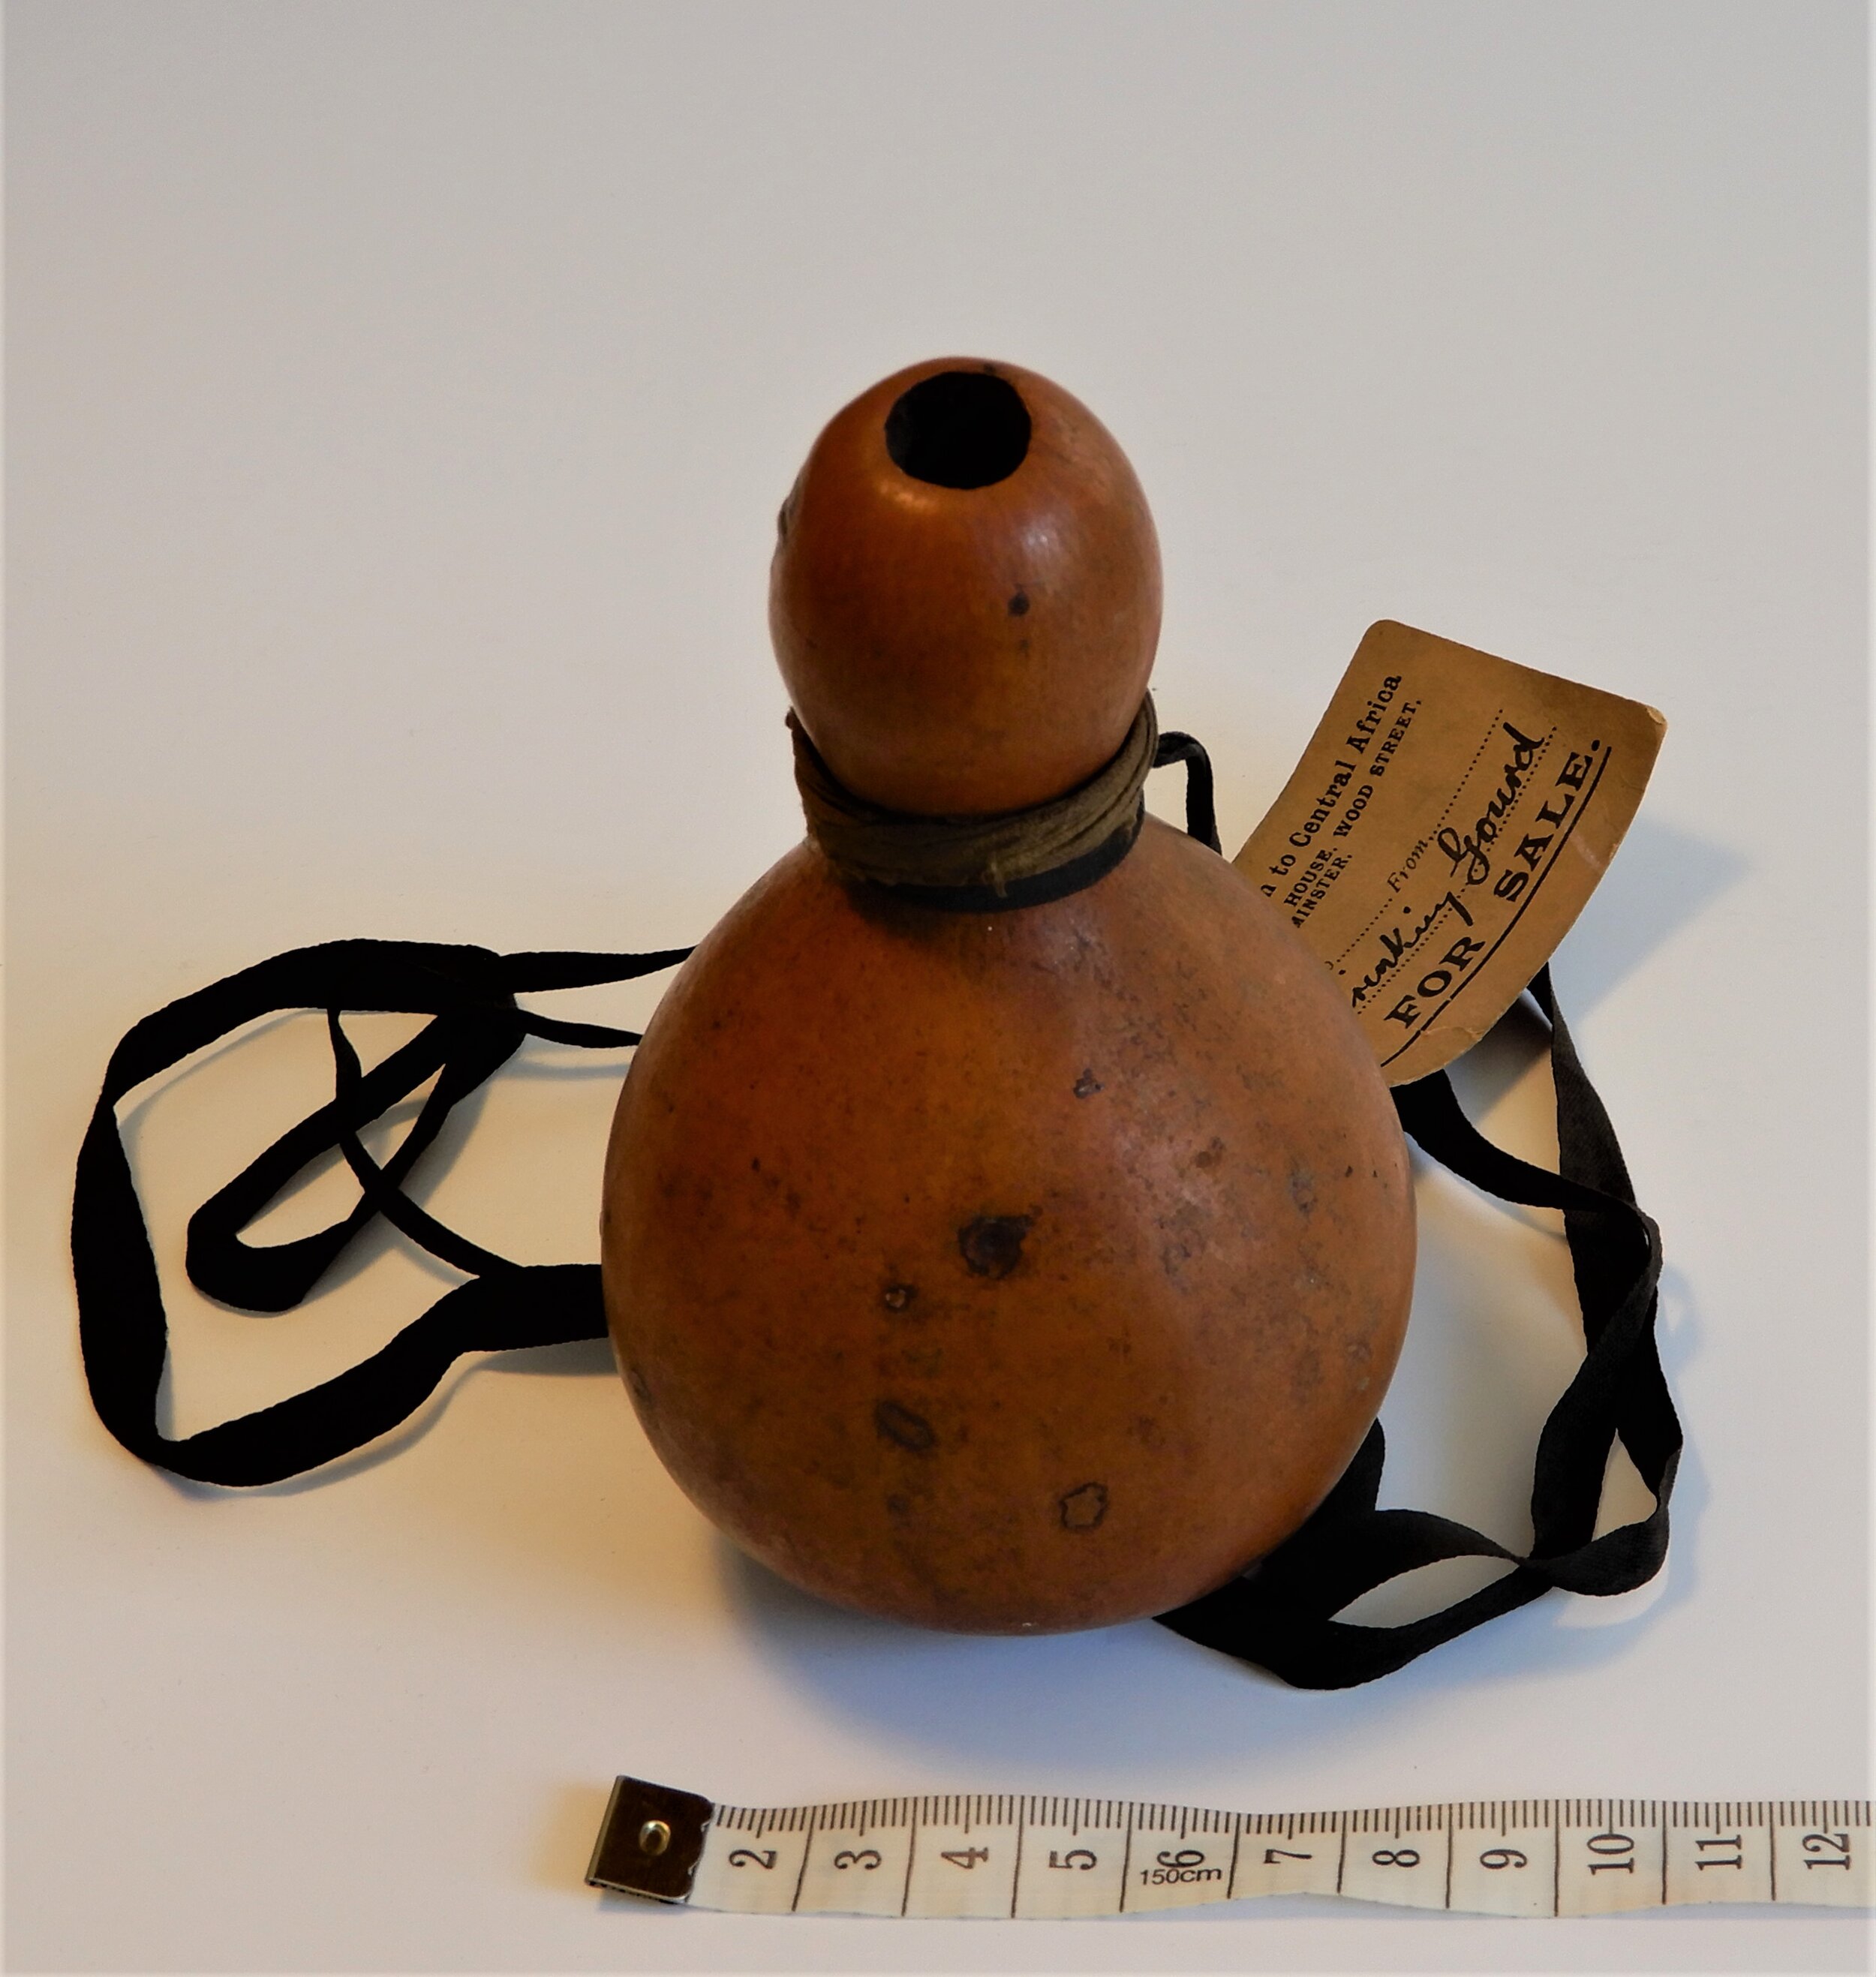  A medium brown gourd which has one large bulbous shape at the bottom and a more elongated slimmer bulbous shape at the top. It. is viewed from the top so you can see the hole in the top.   Closer to the viewer is an old fashioned measuring tape. 